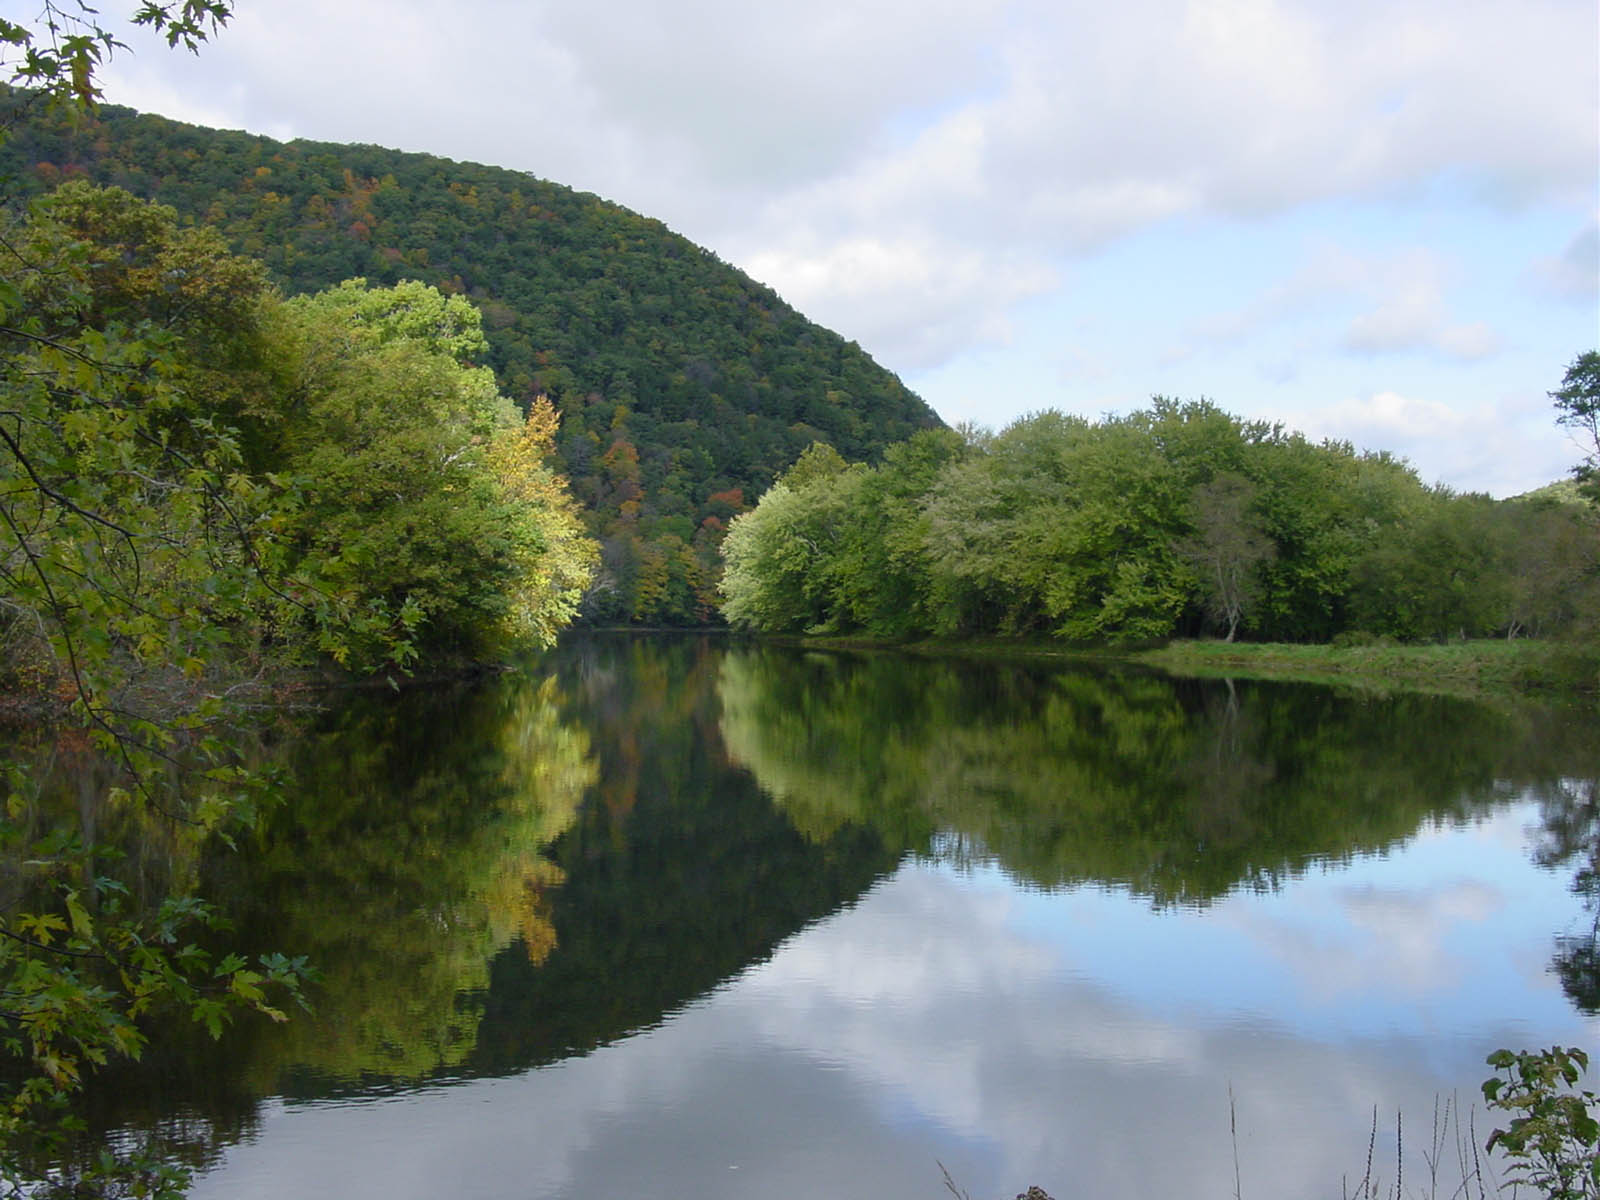 A flat, calm view of the Housatonic River in early fall